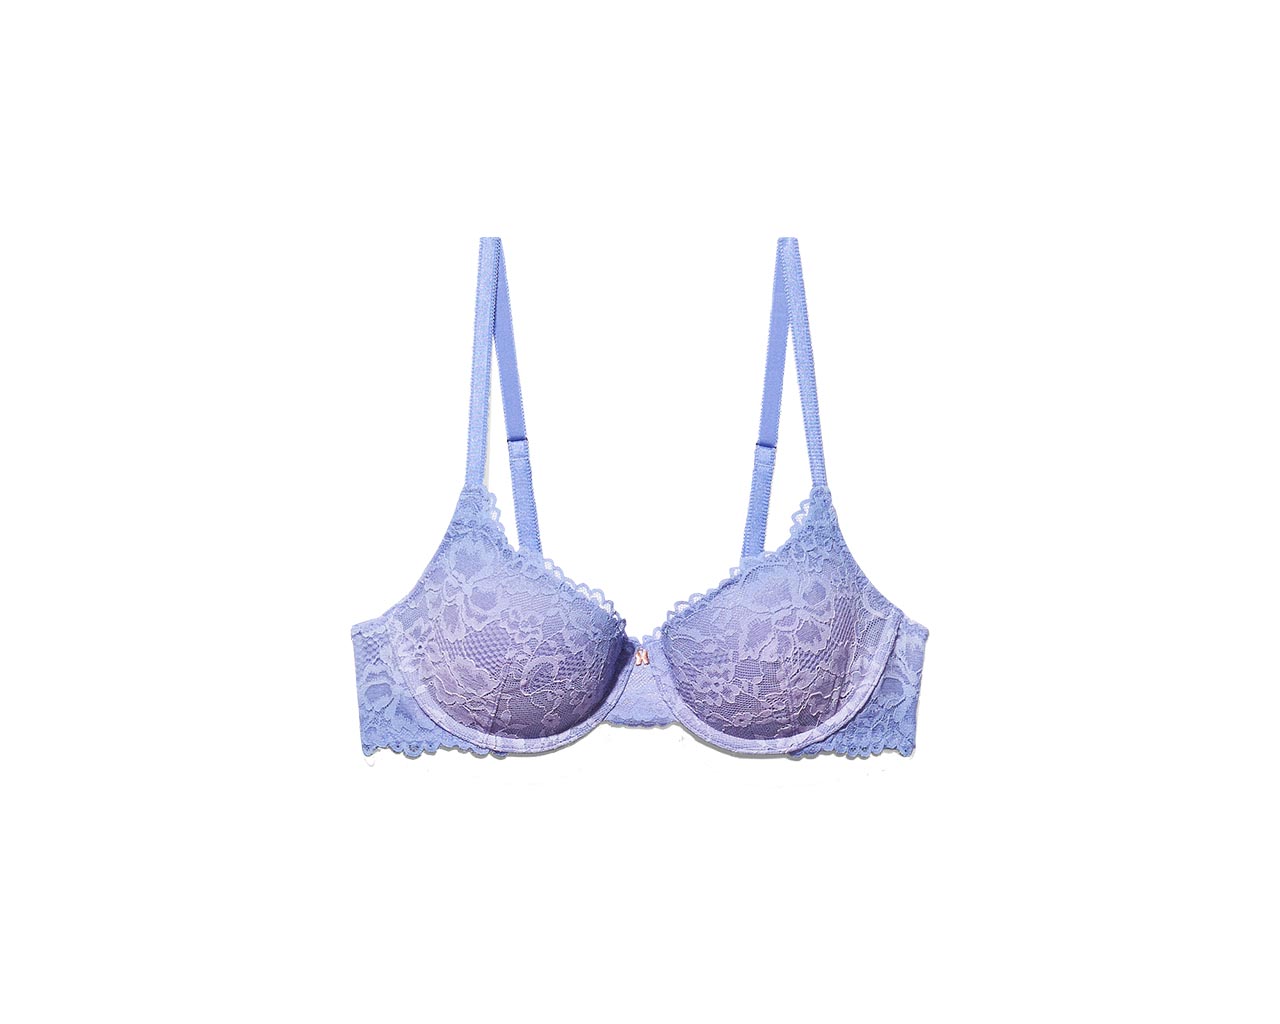 SAVAGE x FENTY Free Spirit Floral Embroidery Balconette Bra, I Made a  Career Out of Shopping, but These Are 15 Items on My Personal April Wish  List